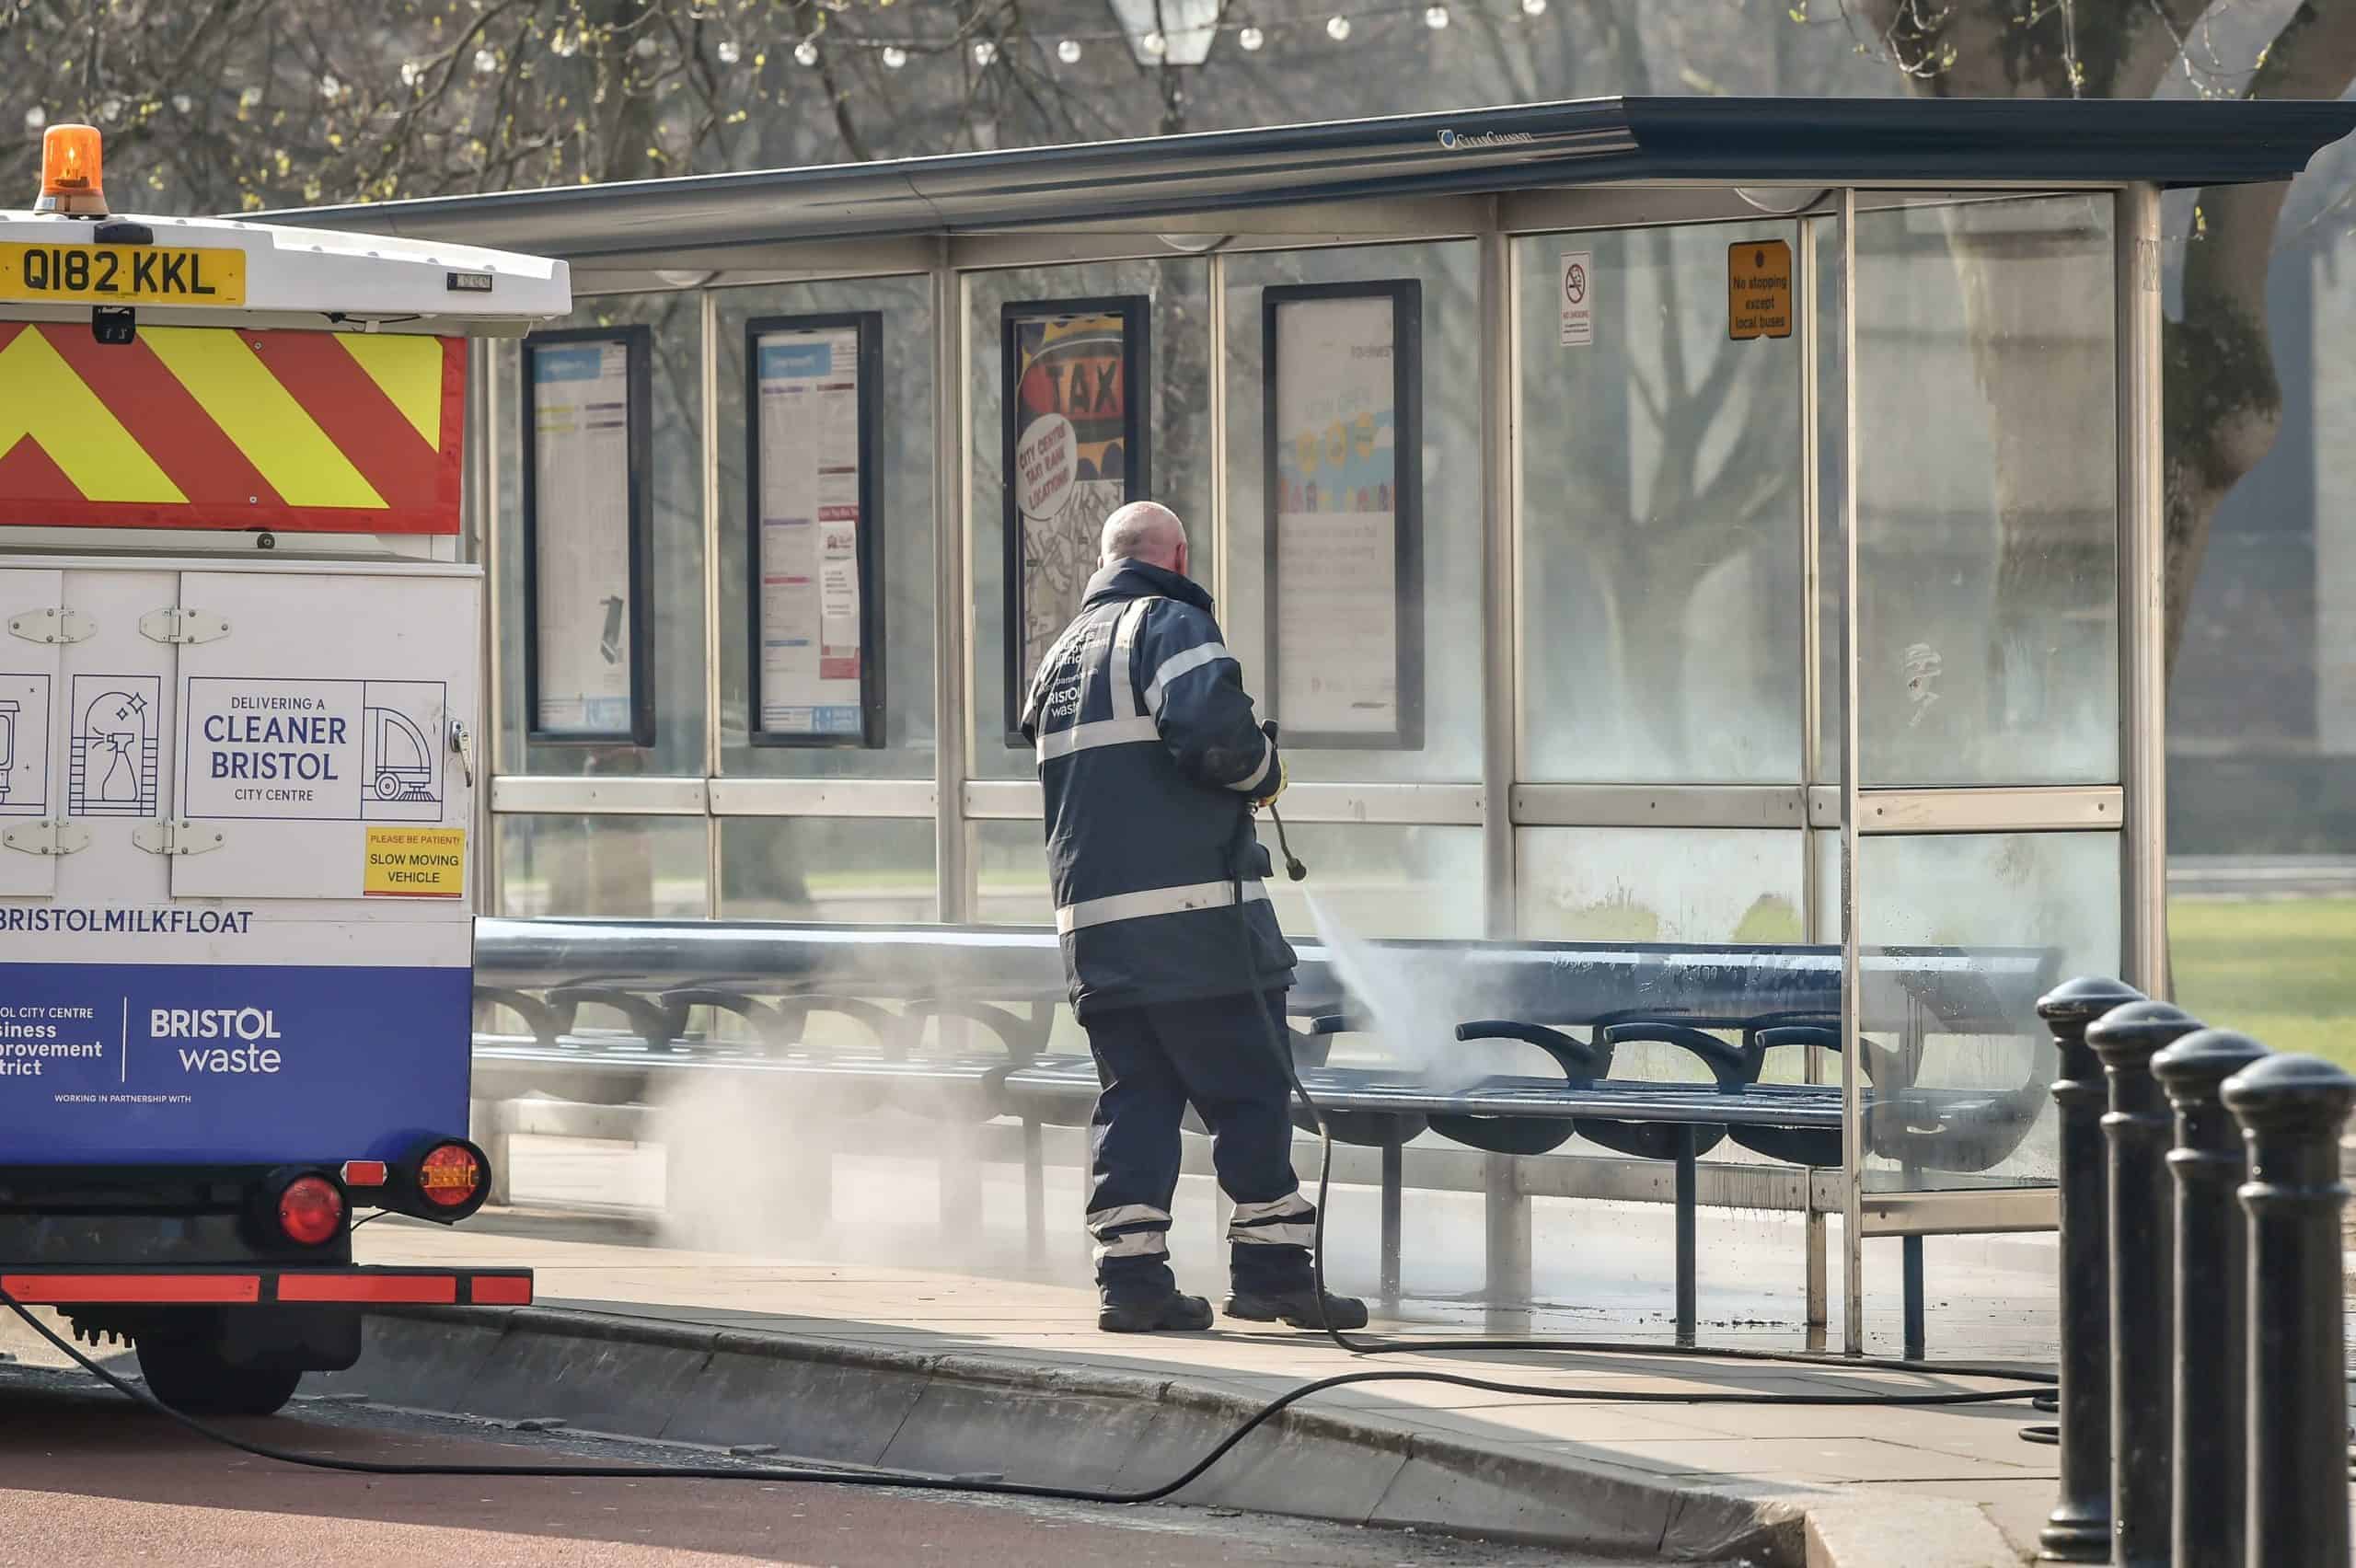 Council workers face ‘sickening physical and verbal assaults’ during pandemic